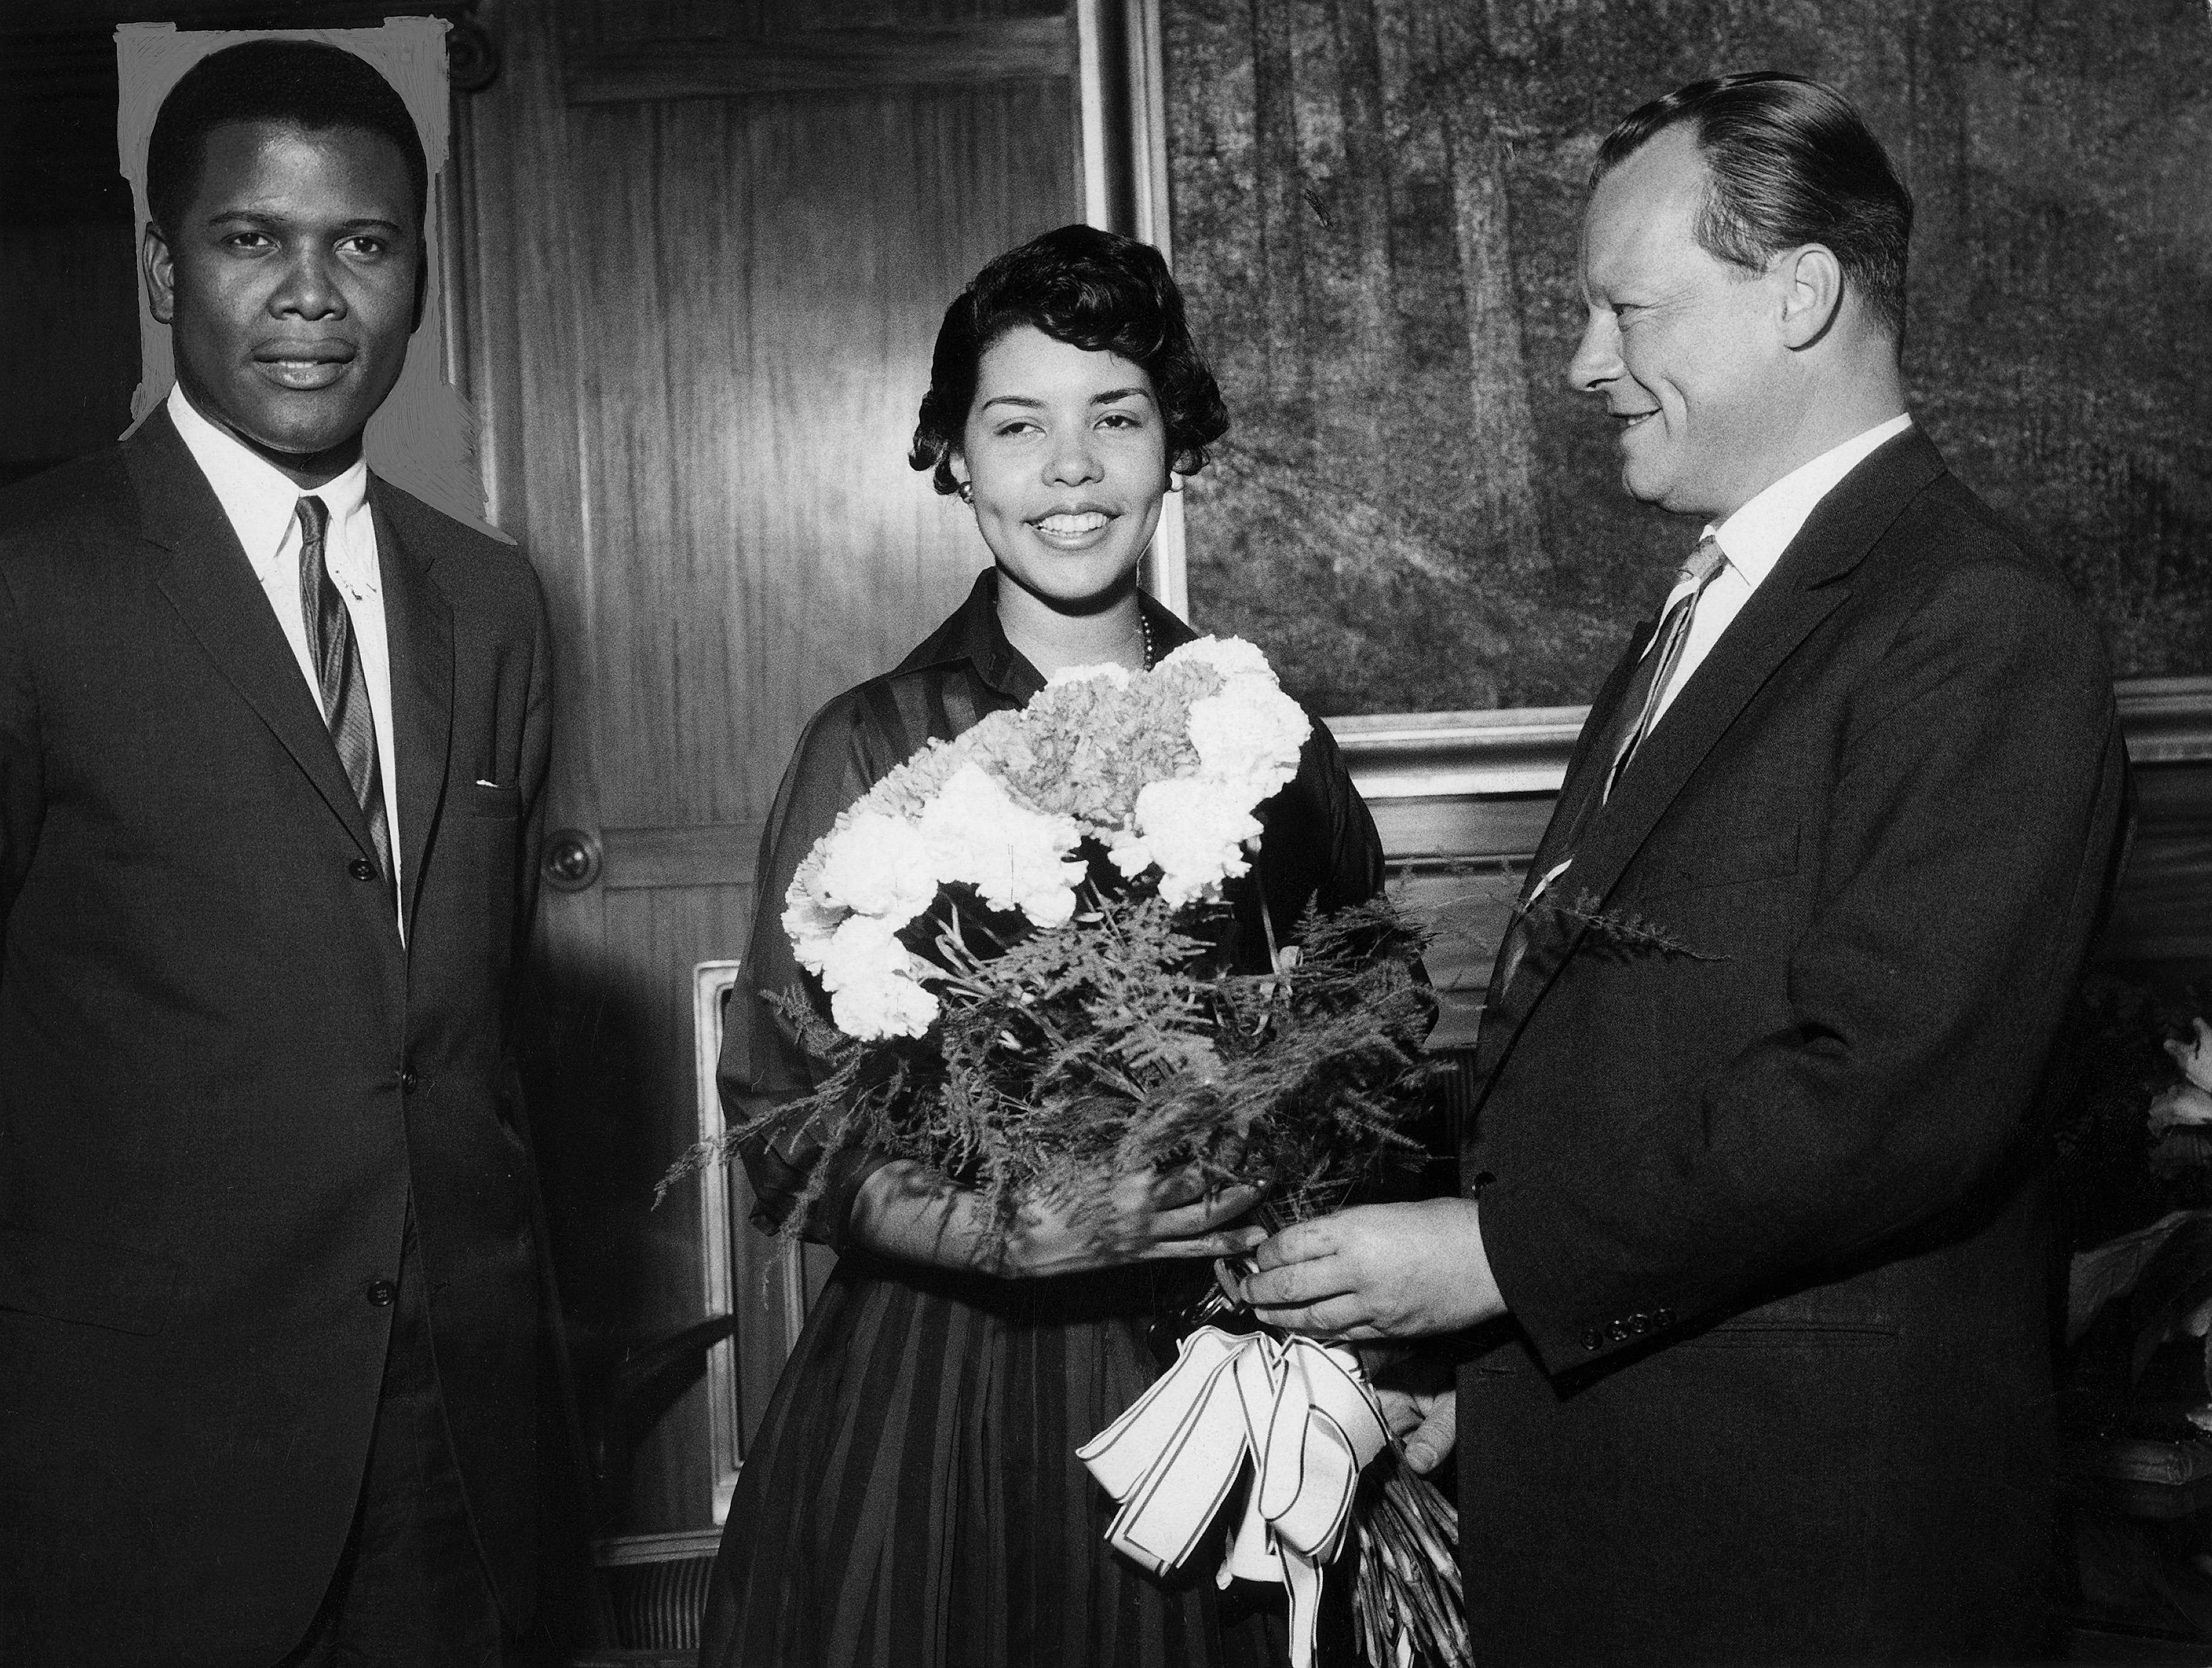 Sidney Poitier is received with his ex-wife, Juanita Hardy, by Willy Brandt in 1960, in Berlin, Germany. | Source: Getty Images